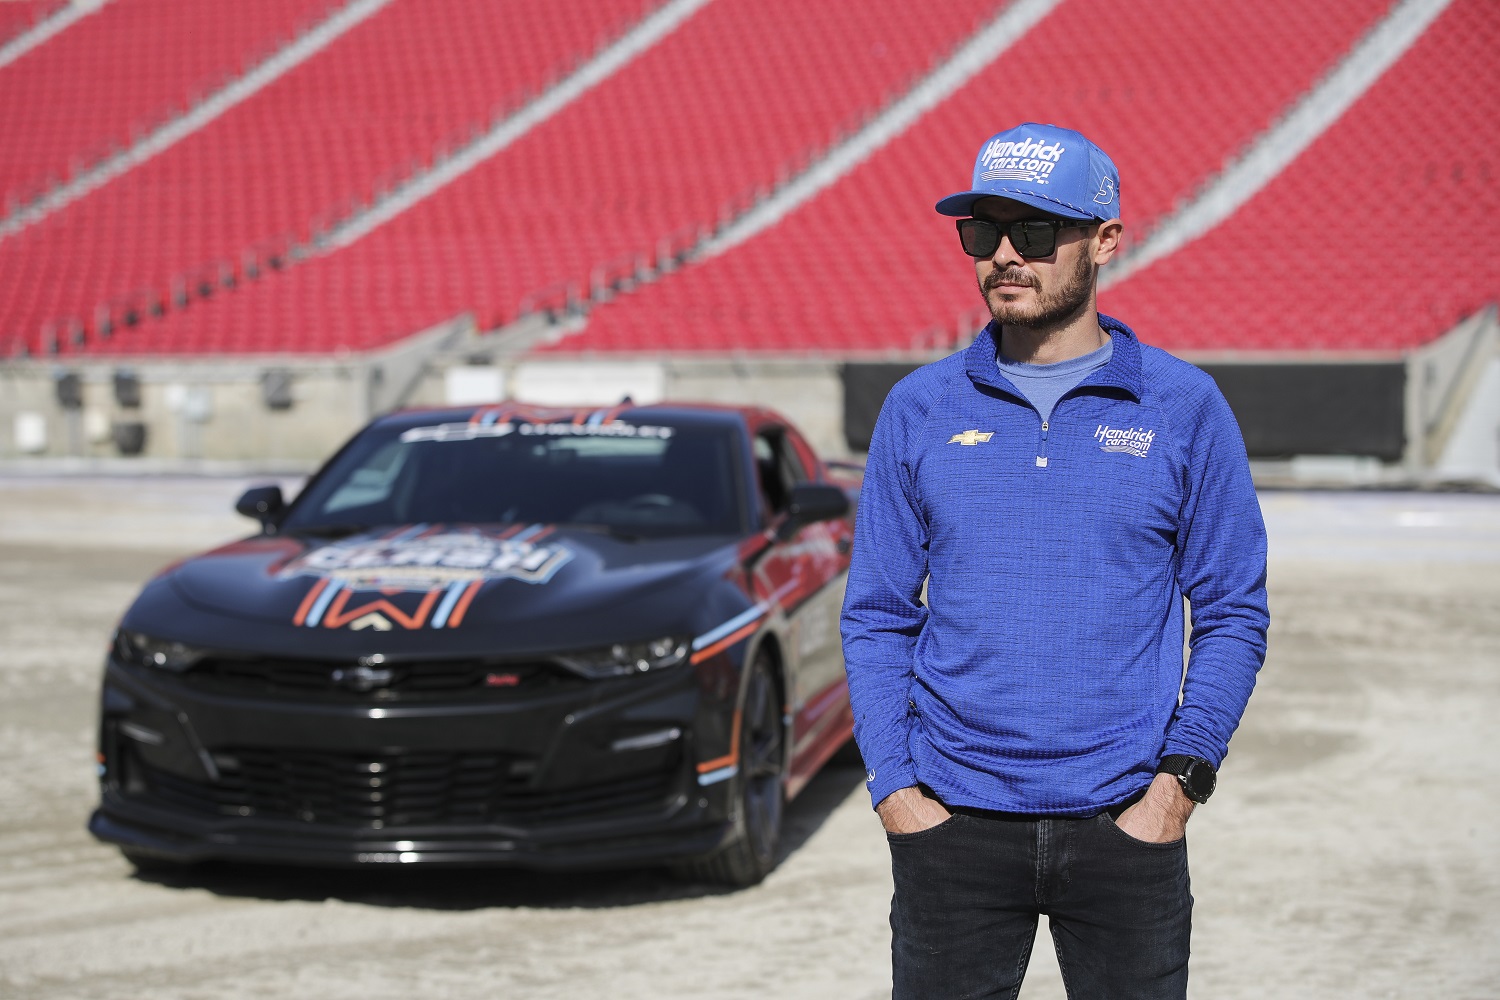 Kyle Larson arrives for the groundbreaking ceremony ahead of the Busch Light Clash at The Los Angeles Memorial Coliseum on Dec. 15, 2022. | Meg Oliphant/Getty Images